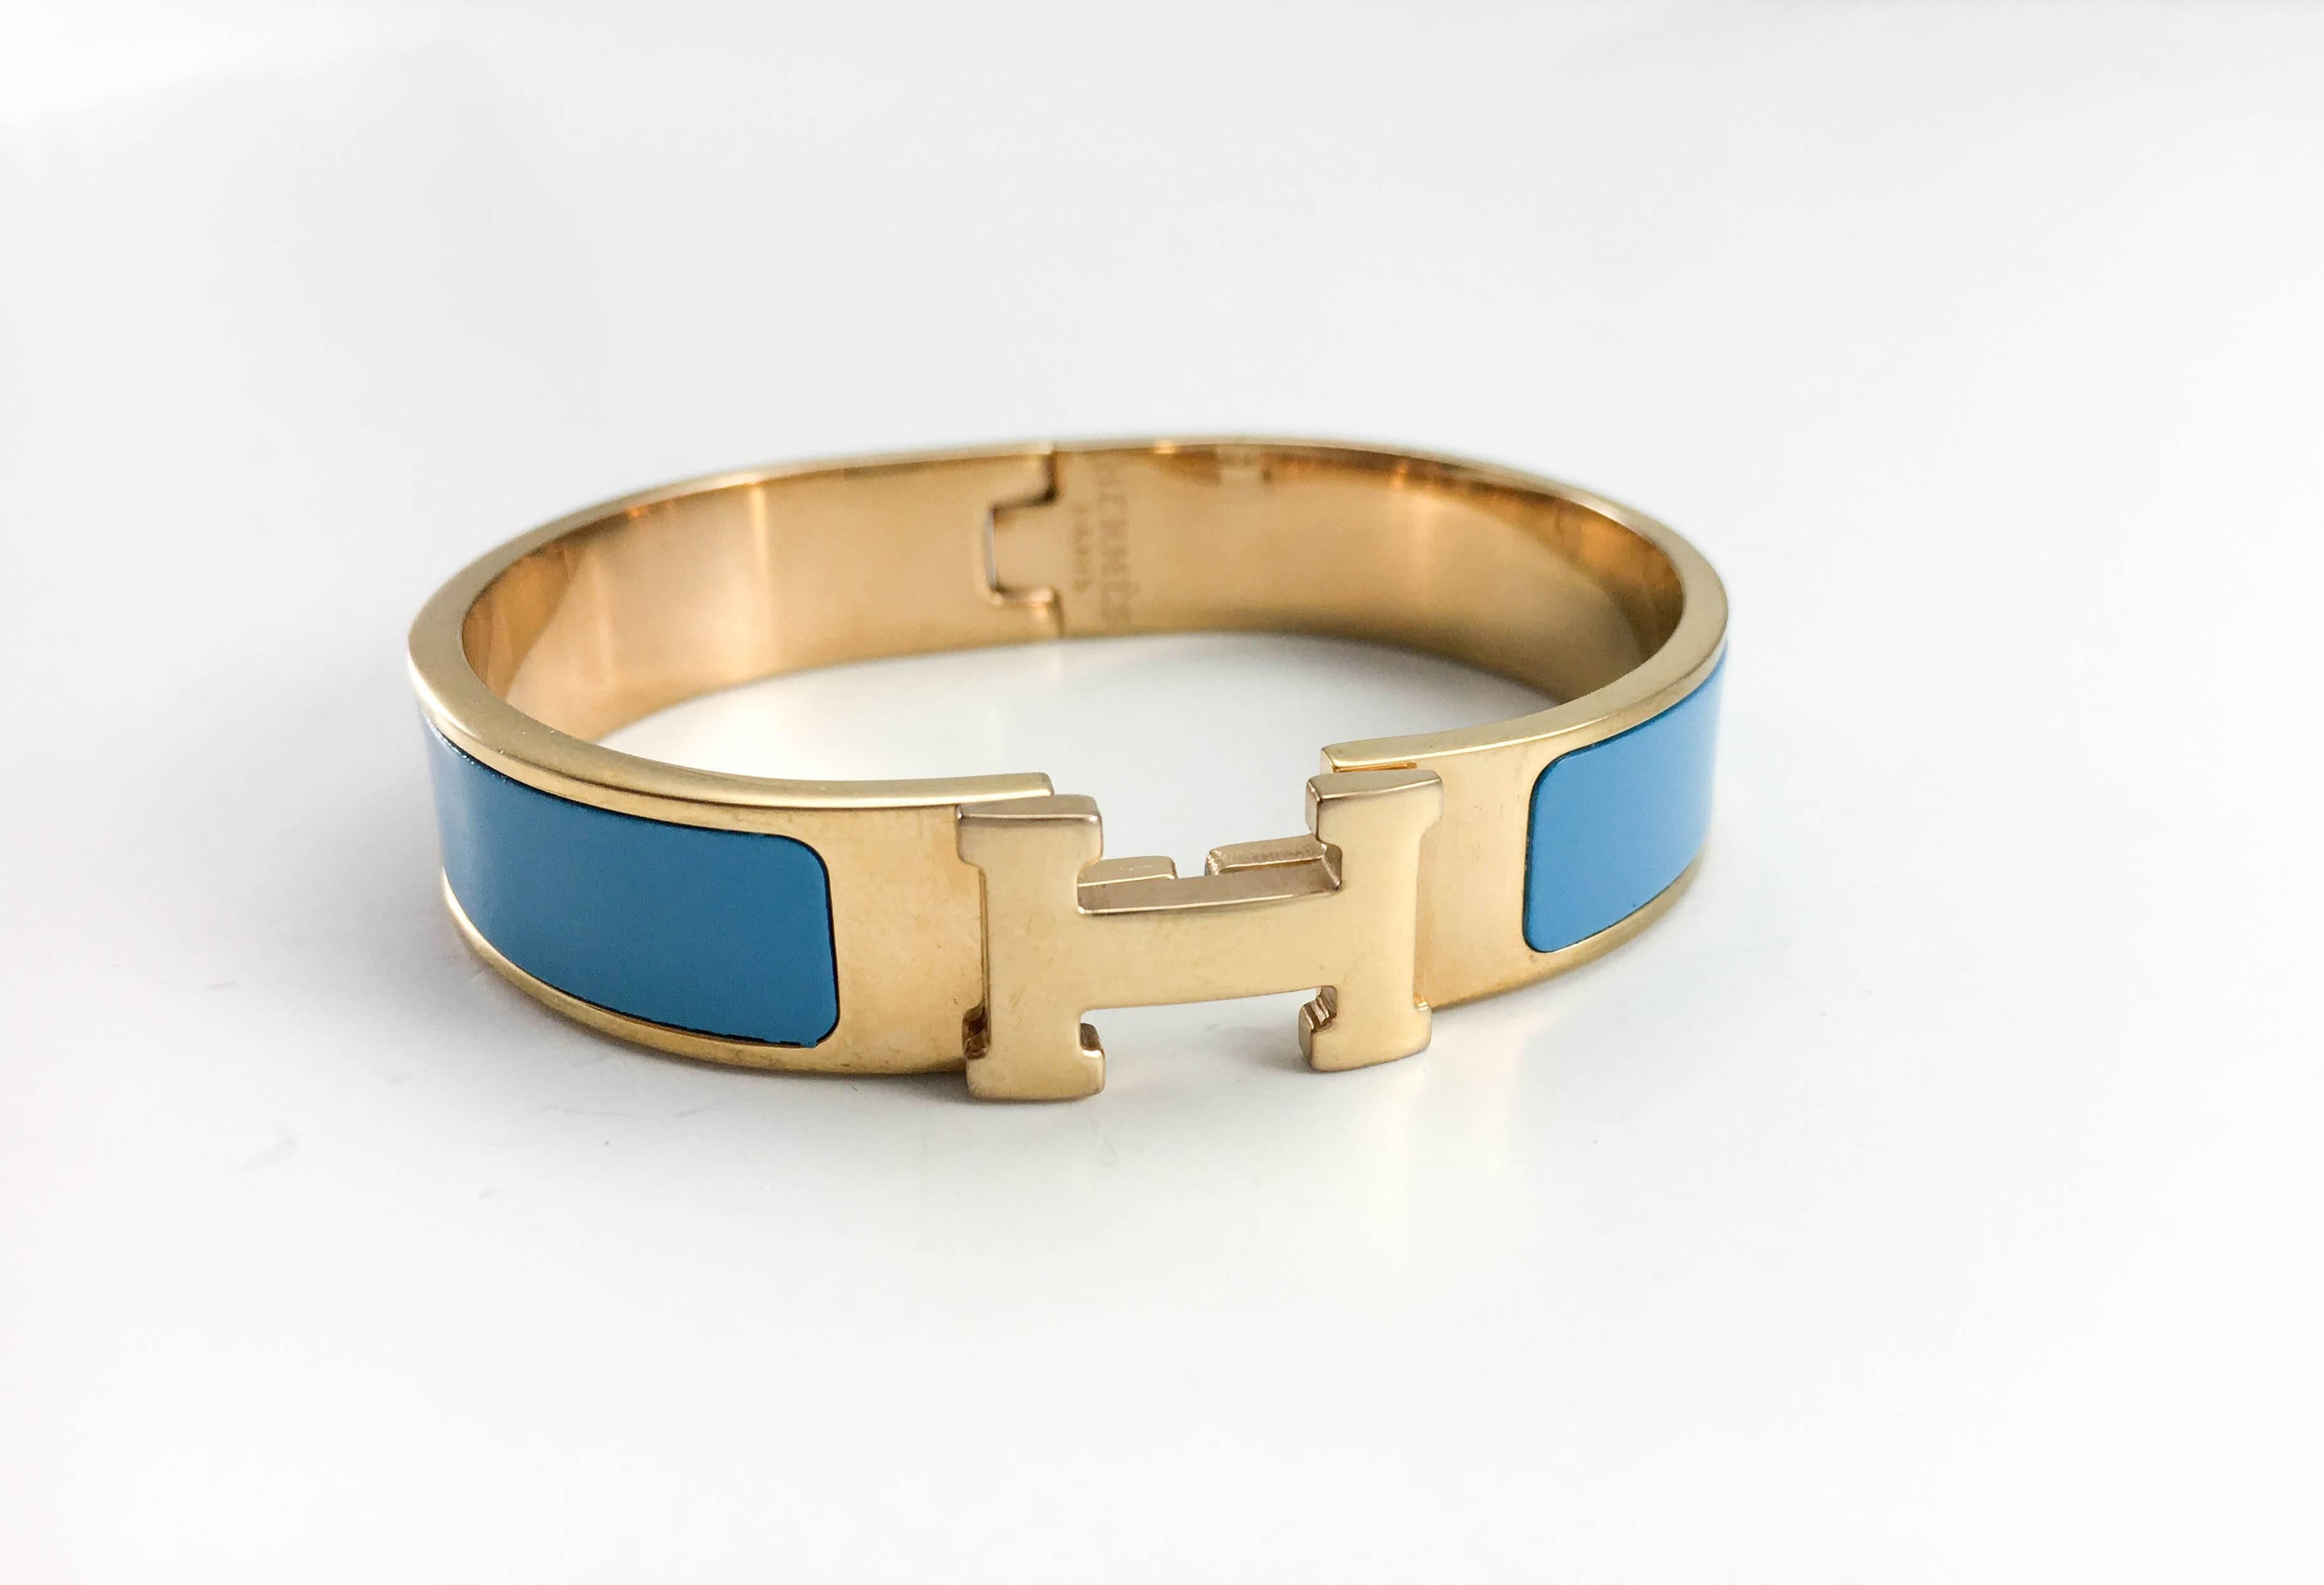 Hermes Clic Clac H Blue and Rose Gold-Plated Bracelet. This very chic and elegant bracelet by Hermes features rose gold-plated hardware and blue enamel. The clic clac clasp is in the shape of the Hermes iconic ‘H’. Understated and yet striking, this